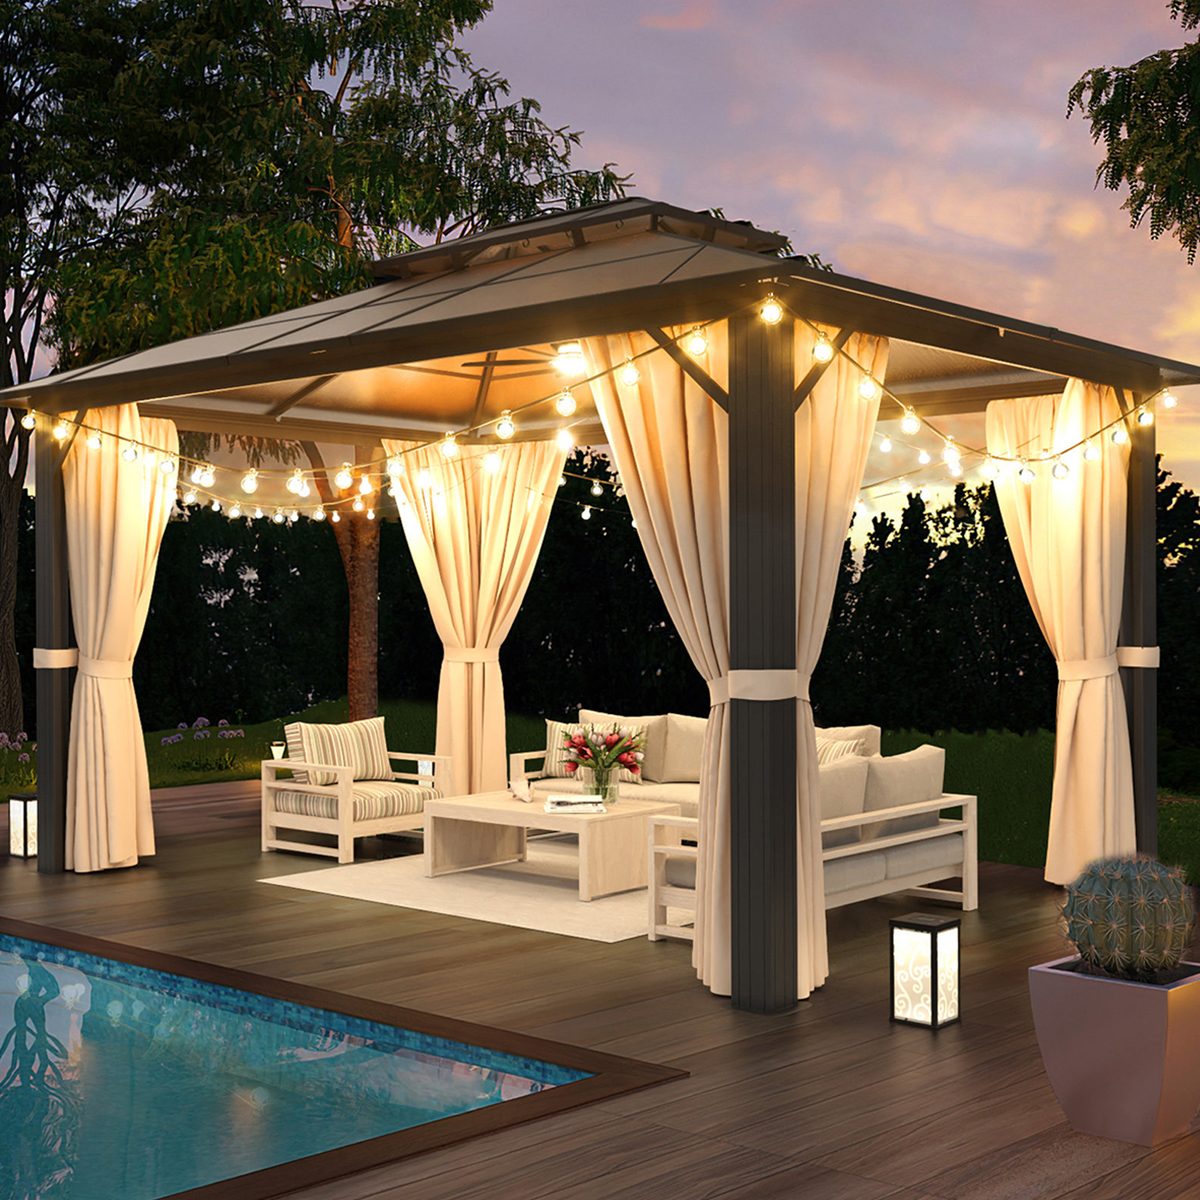 8 Hot Tub Shelter Ideas to Consider This Summer